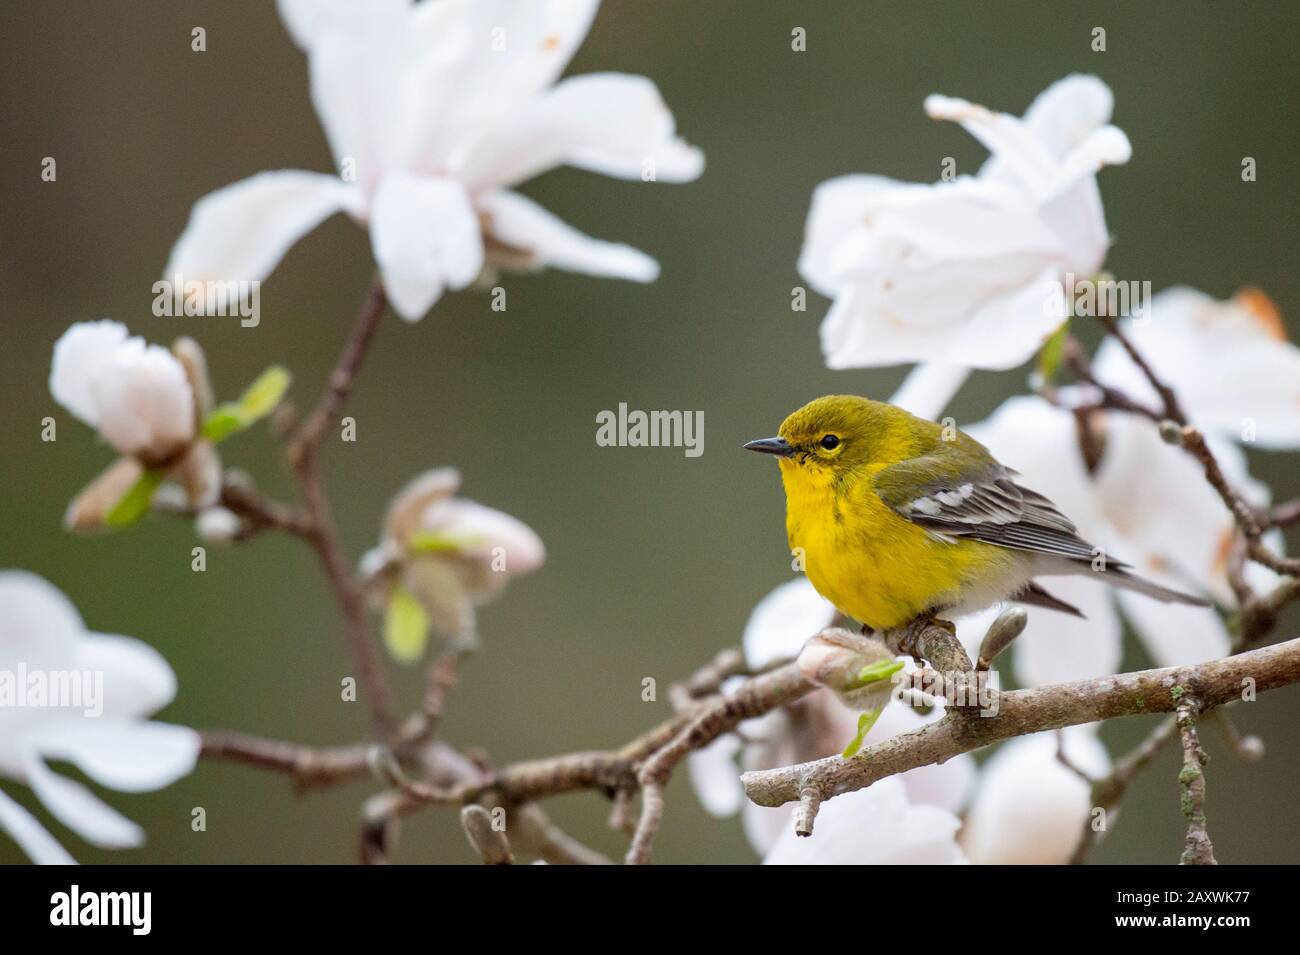 Bright yellow Pine Warbler perched in a flowering tree in spring in sotf overcast light. Stock Photo